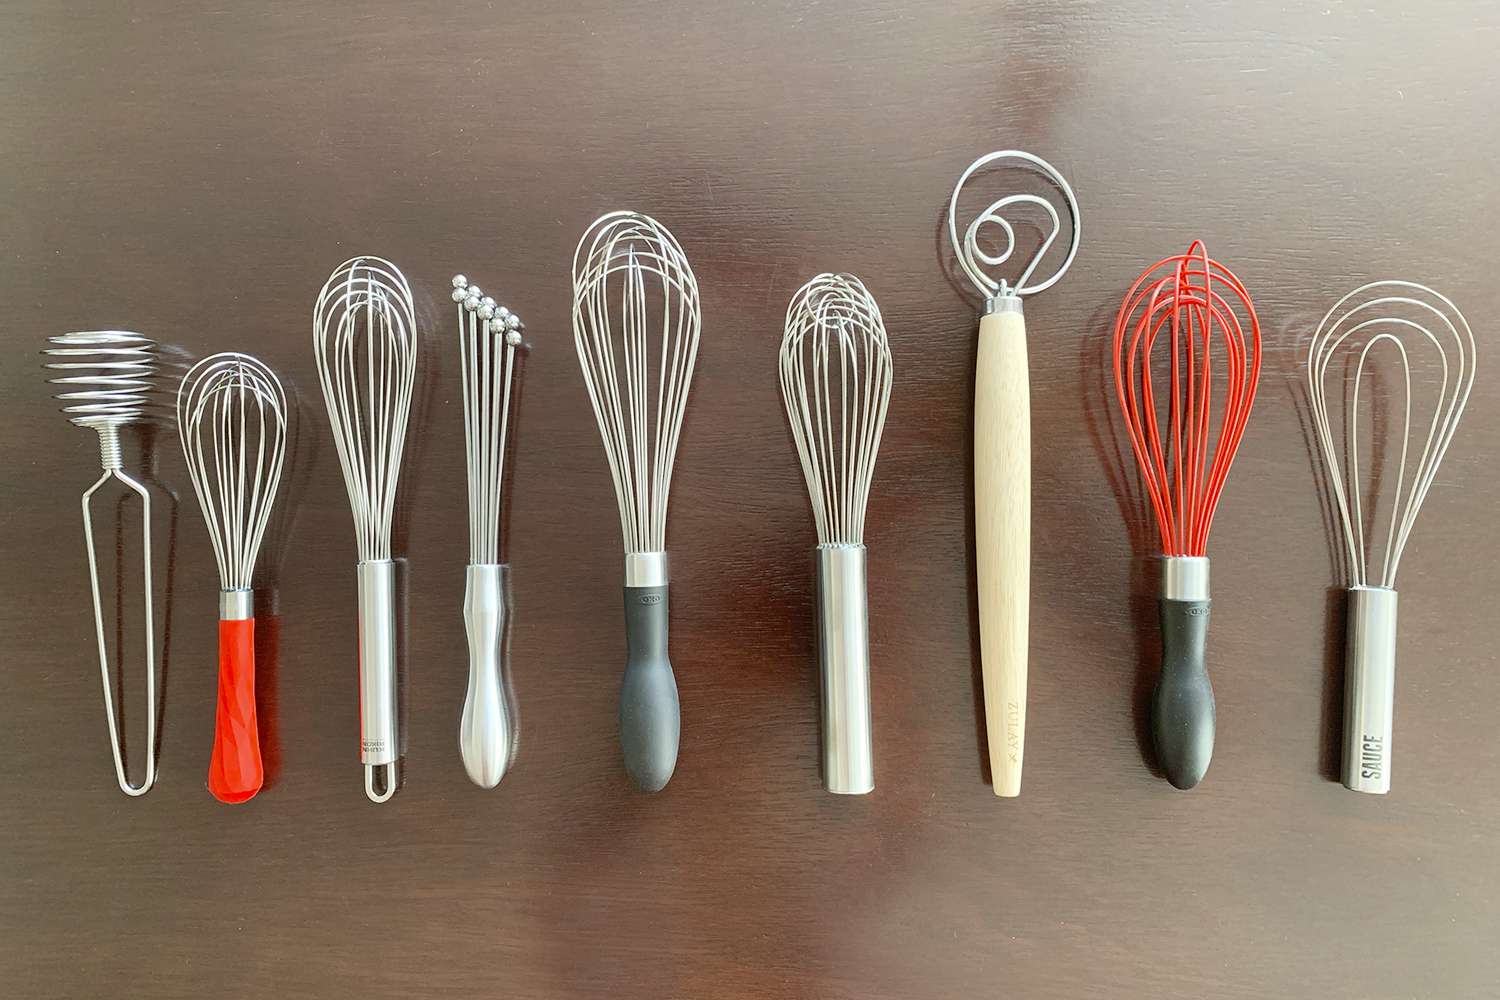 https://recipes.net/wp-content/uploads/2023/09/what-are-the-different-types-of-whisks-used-for-1694955450.jpg